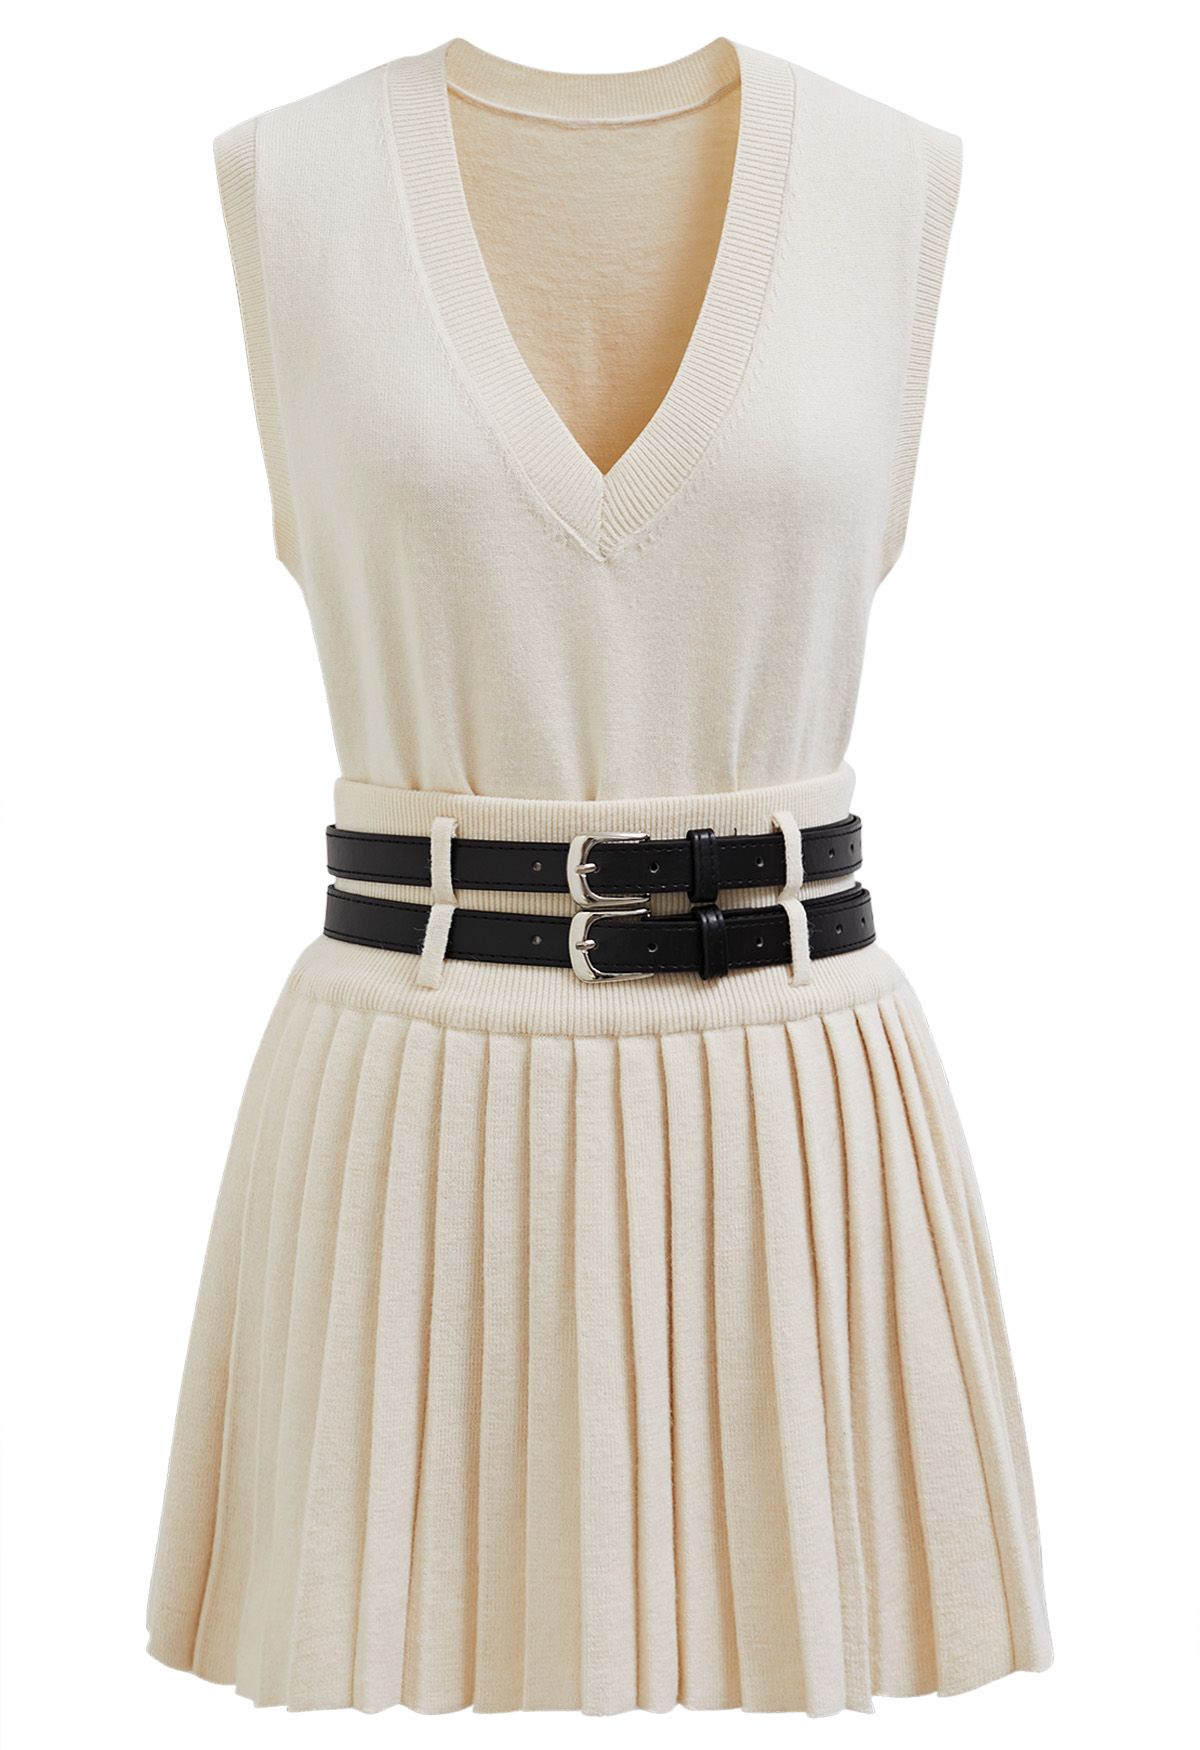 V-Neck Sleeveless Knit Top and Pleated Skirt Set in Cream